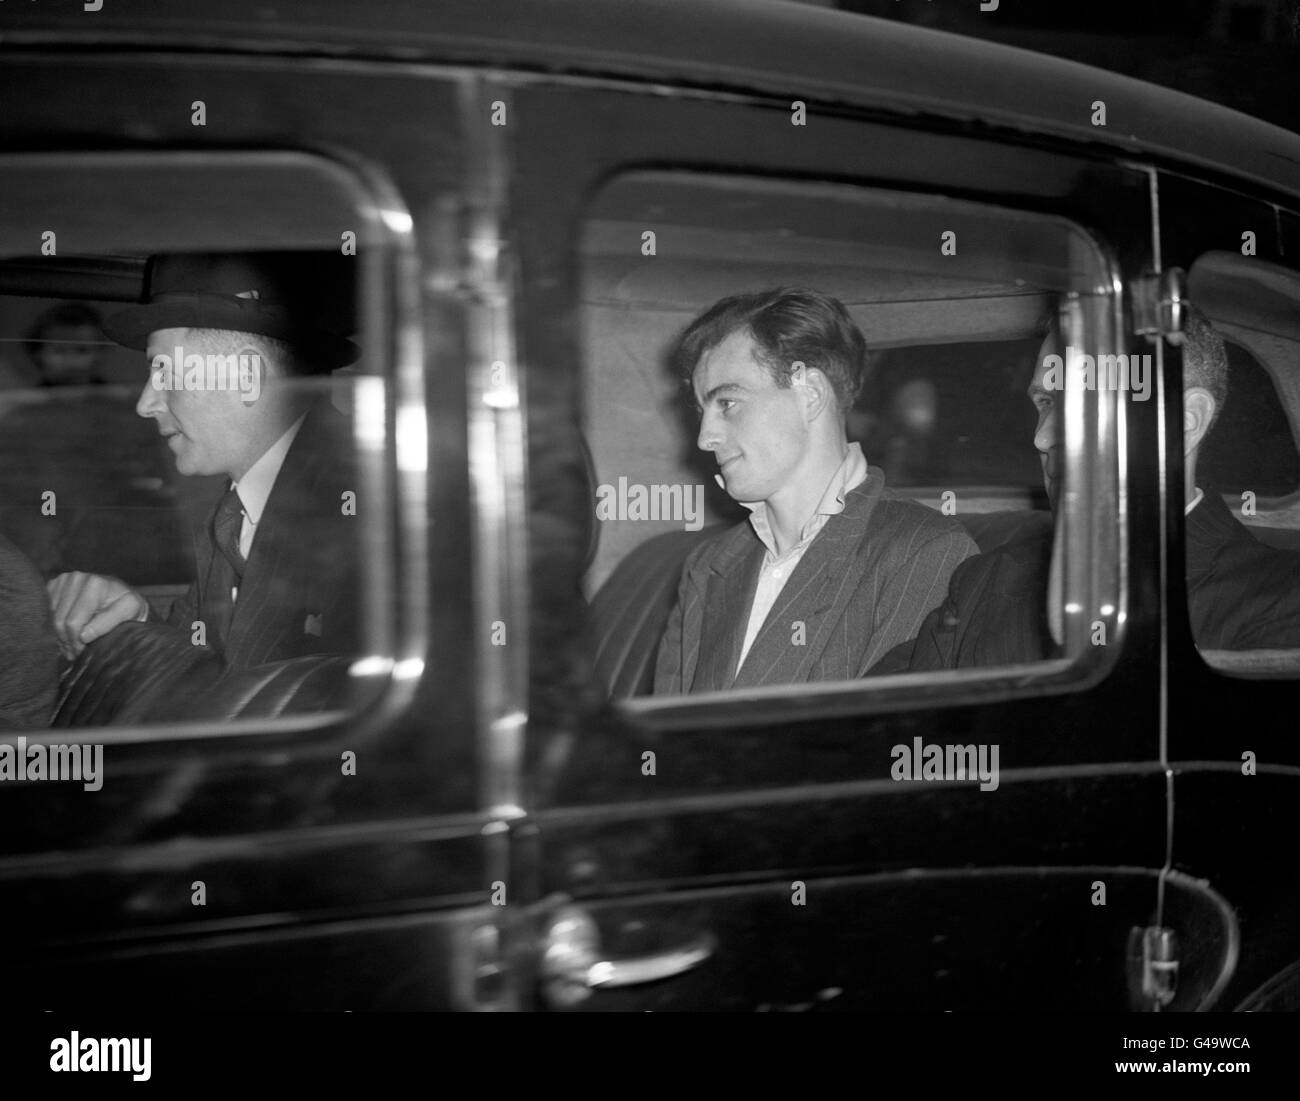 Charles Henry Jenkins pictured in the back of a Police car on his way to Great Marlborough Street Magistrates Court. Along with accomplices Christopher James Geraghty (not pictured) and Terence Rolt (not pictured), Charles Henry Jenkins was charged with the murder of Police Officer Alec de Antiquis who had tackled the men following a botched raid on Jay&#8217;s jewellers in Tottenham Street. The 31yr old was shot dead in Charlotte Street on April 29 1947. Charles Henry Jenkins and Christopher James Geraghty were eventually sentenced to death after an Old Bailey trial and hanged in Stock Photo